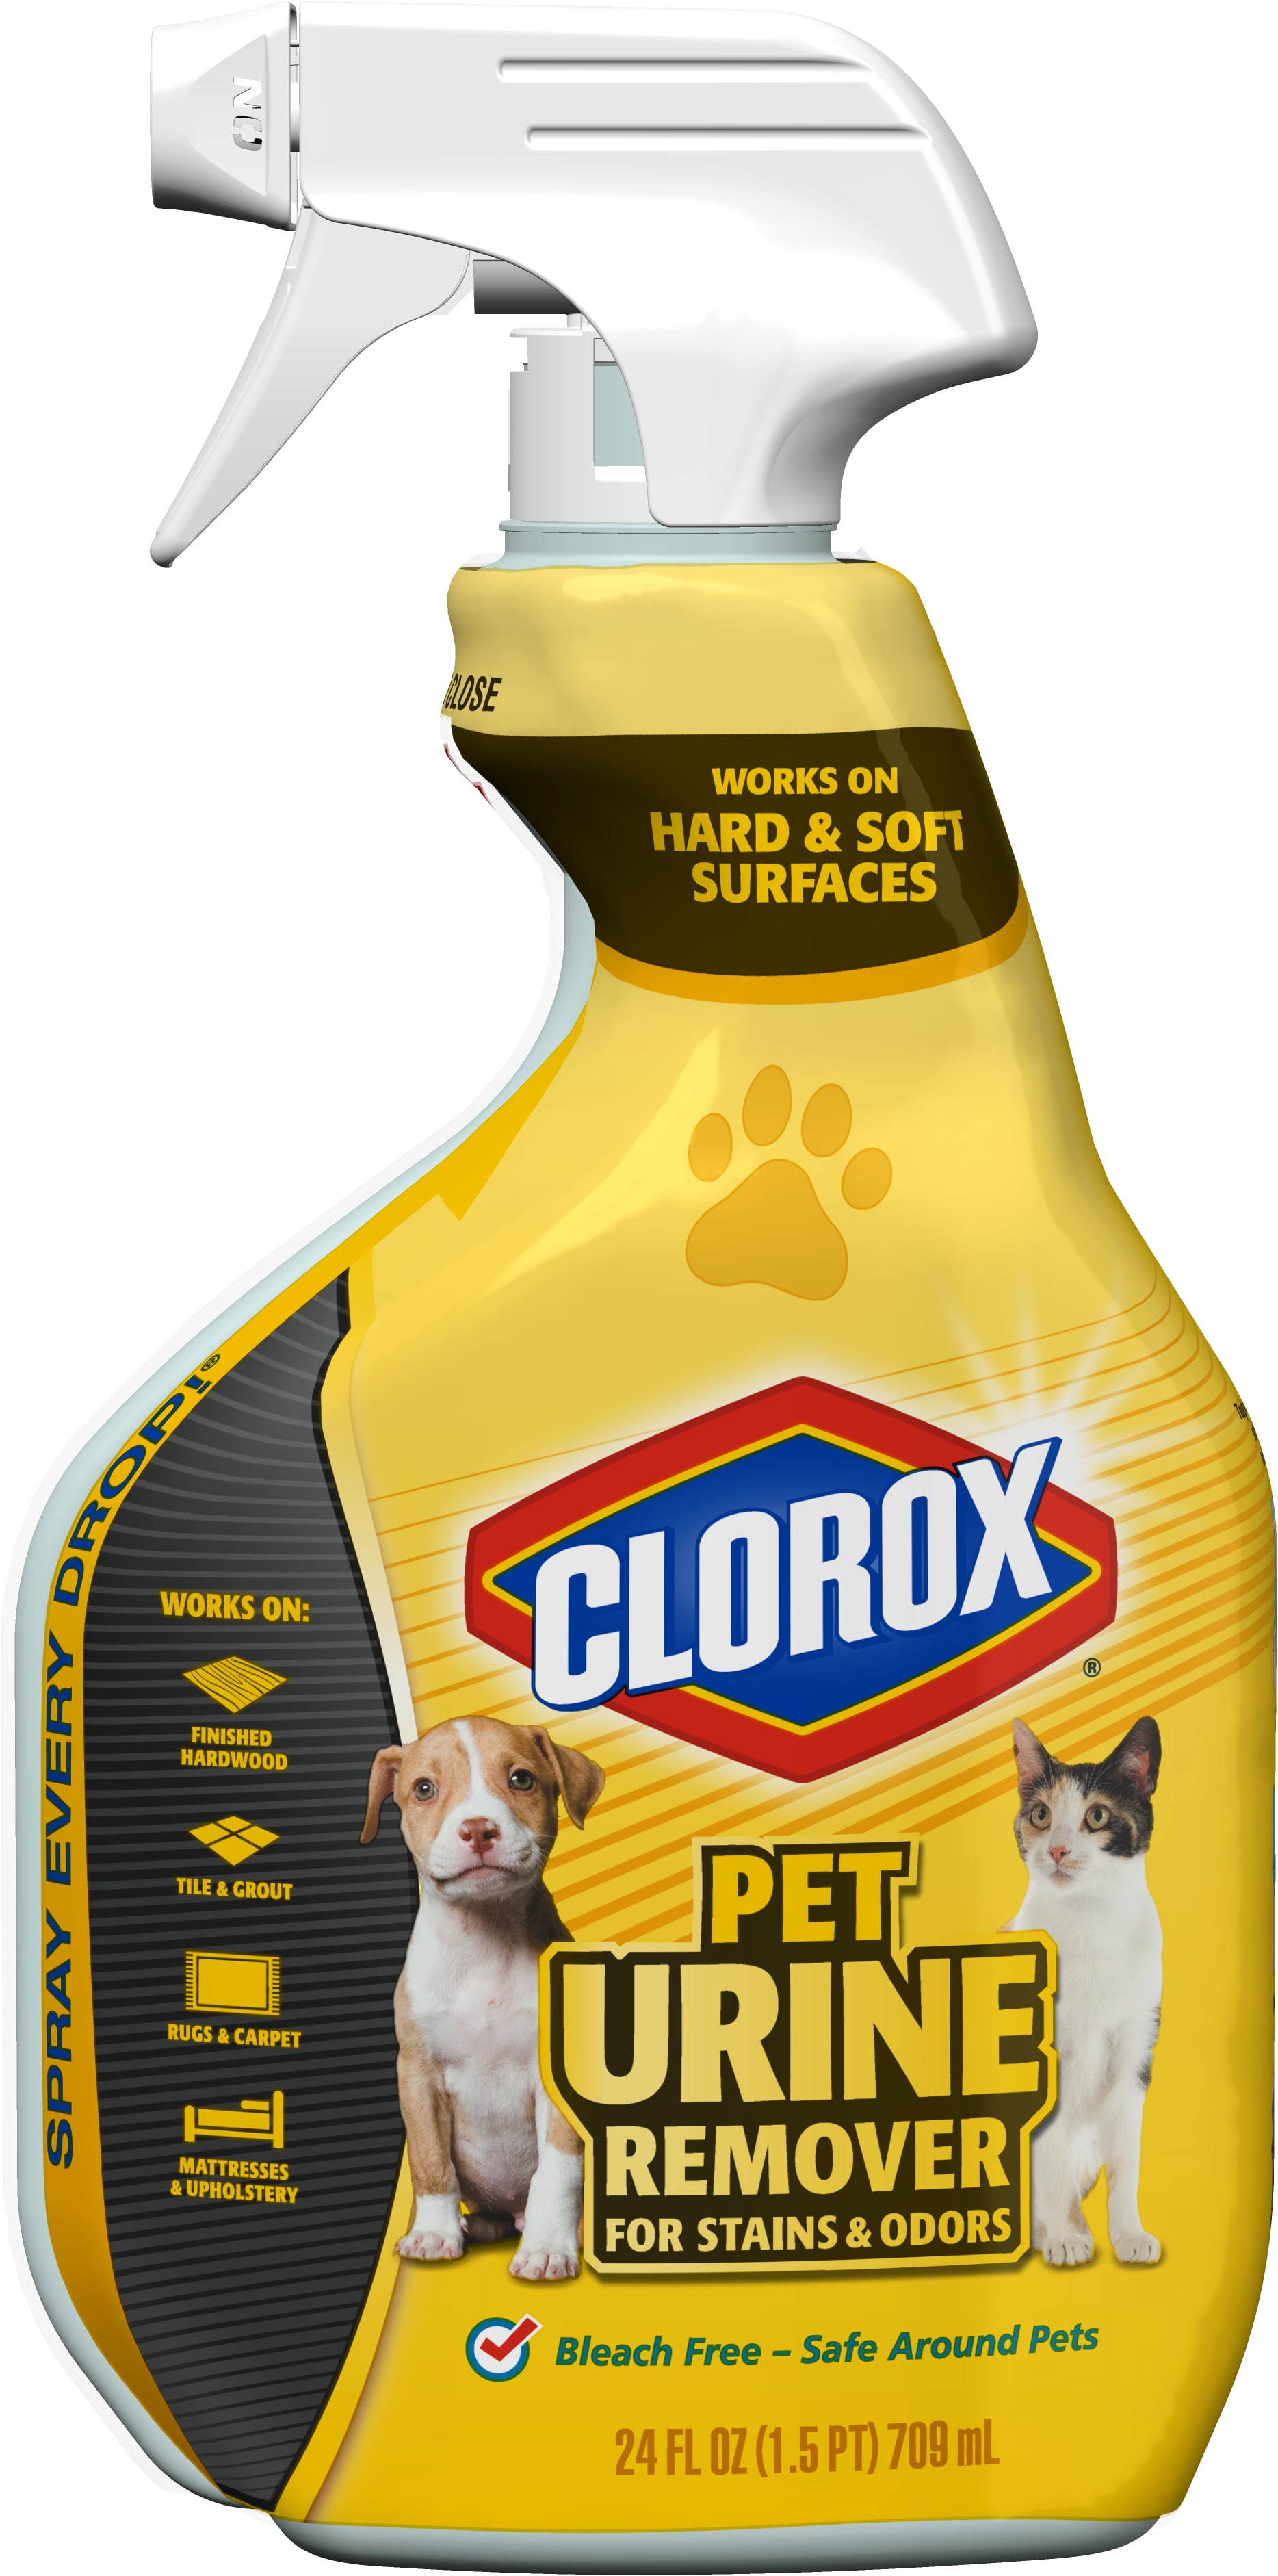 Clorox Pet Urine Remover For Stains And, Outdoor Urine Smell Removal